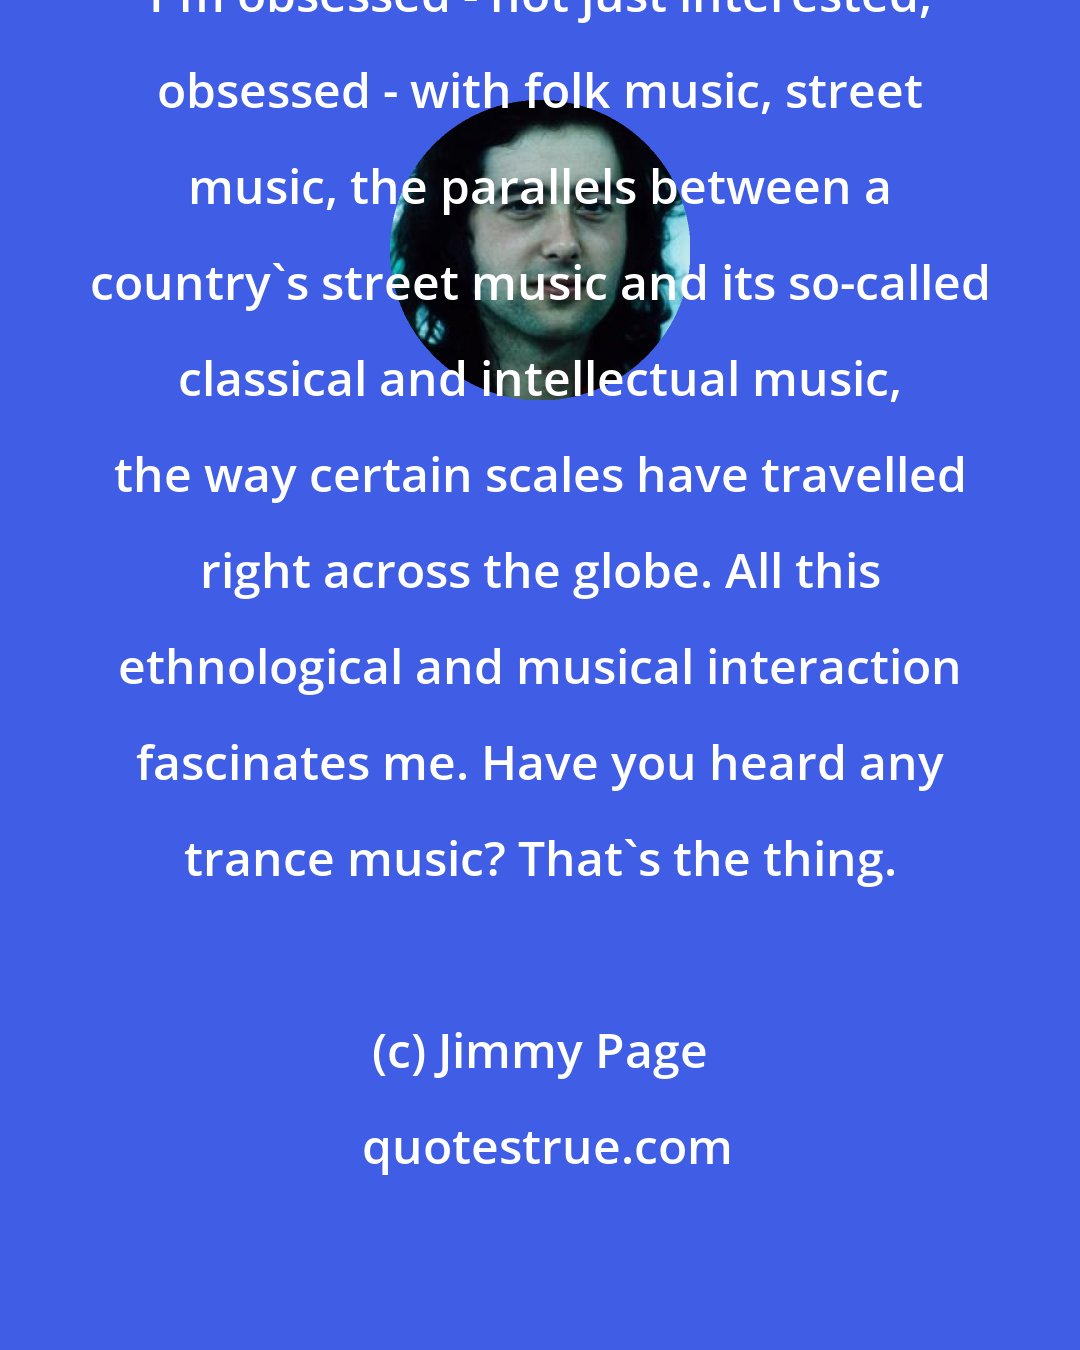 Jimmy Page: I'm obsessed - not just interested, obsessed - with folk music, street music, the parallels between a country's street music and its so-called classical and intellectual music, the way certain scales have travelled right across the globe. All this ethnological and musical interaction fascinates me. Have you heard any trance music? That's the thing.